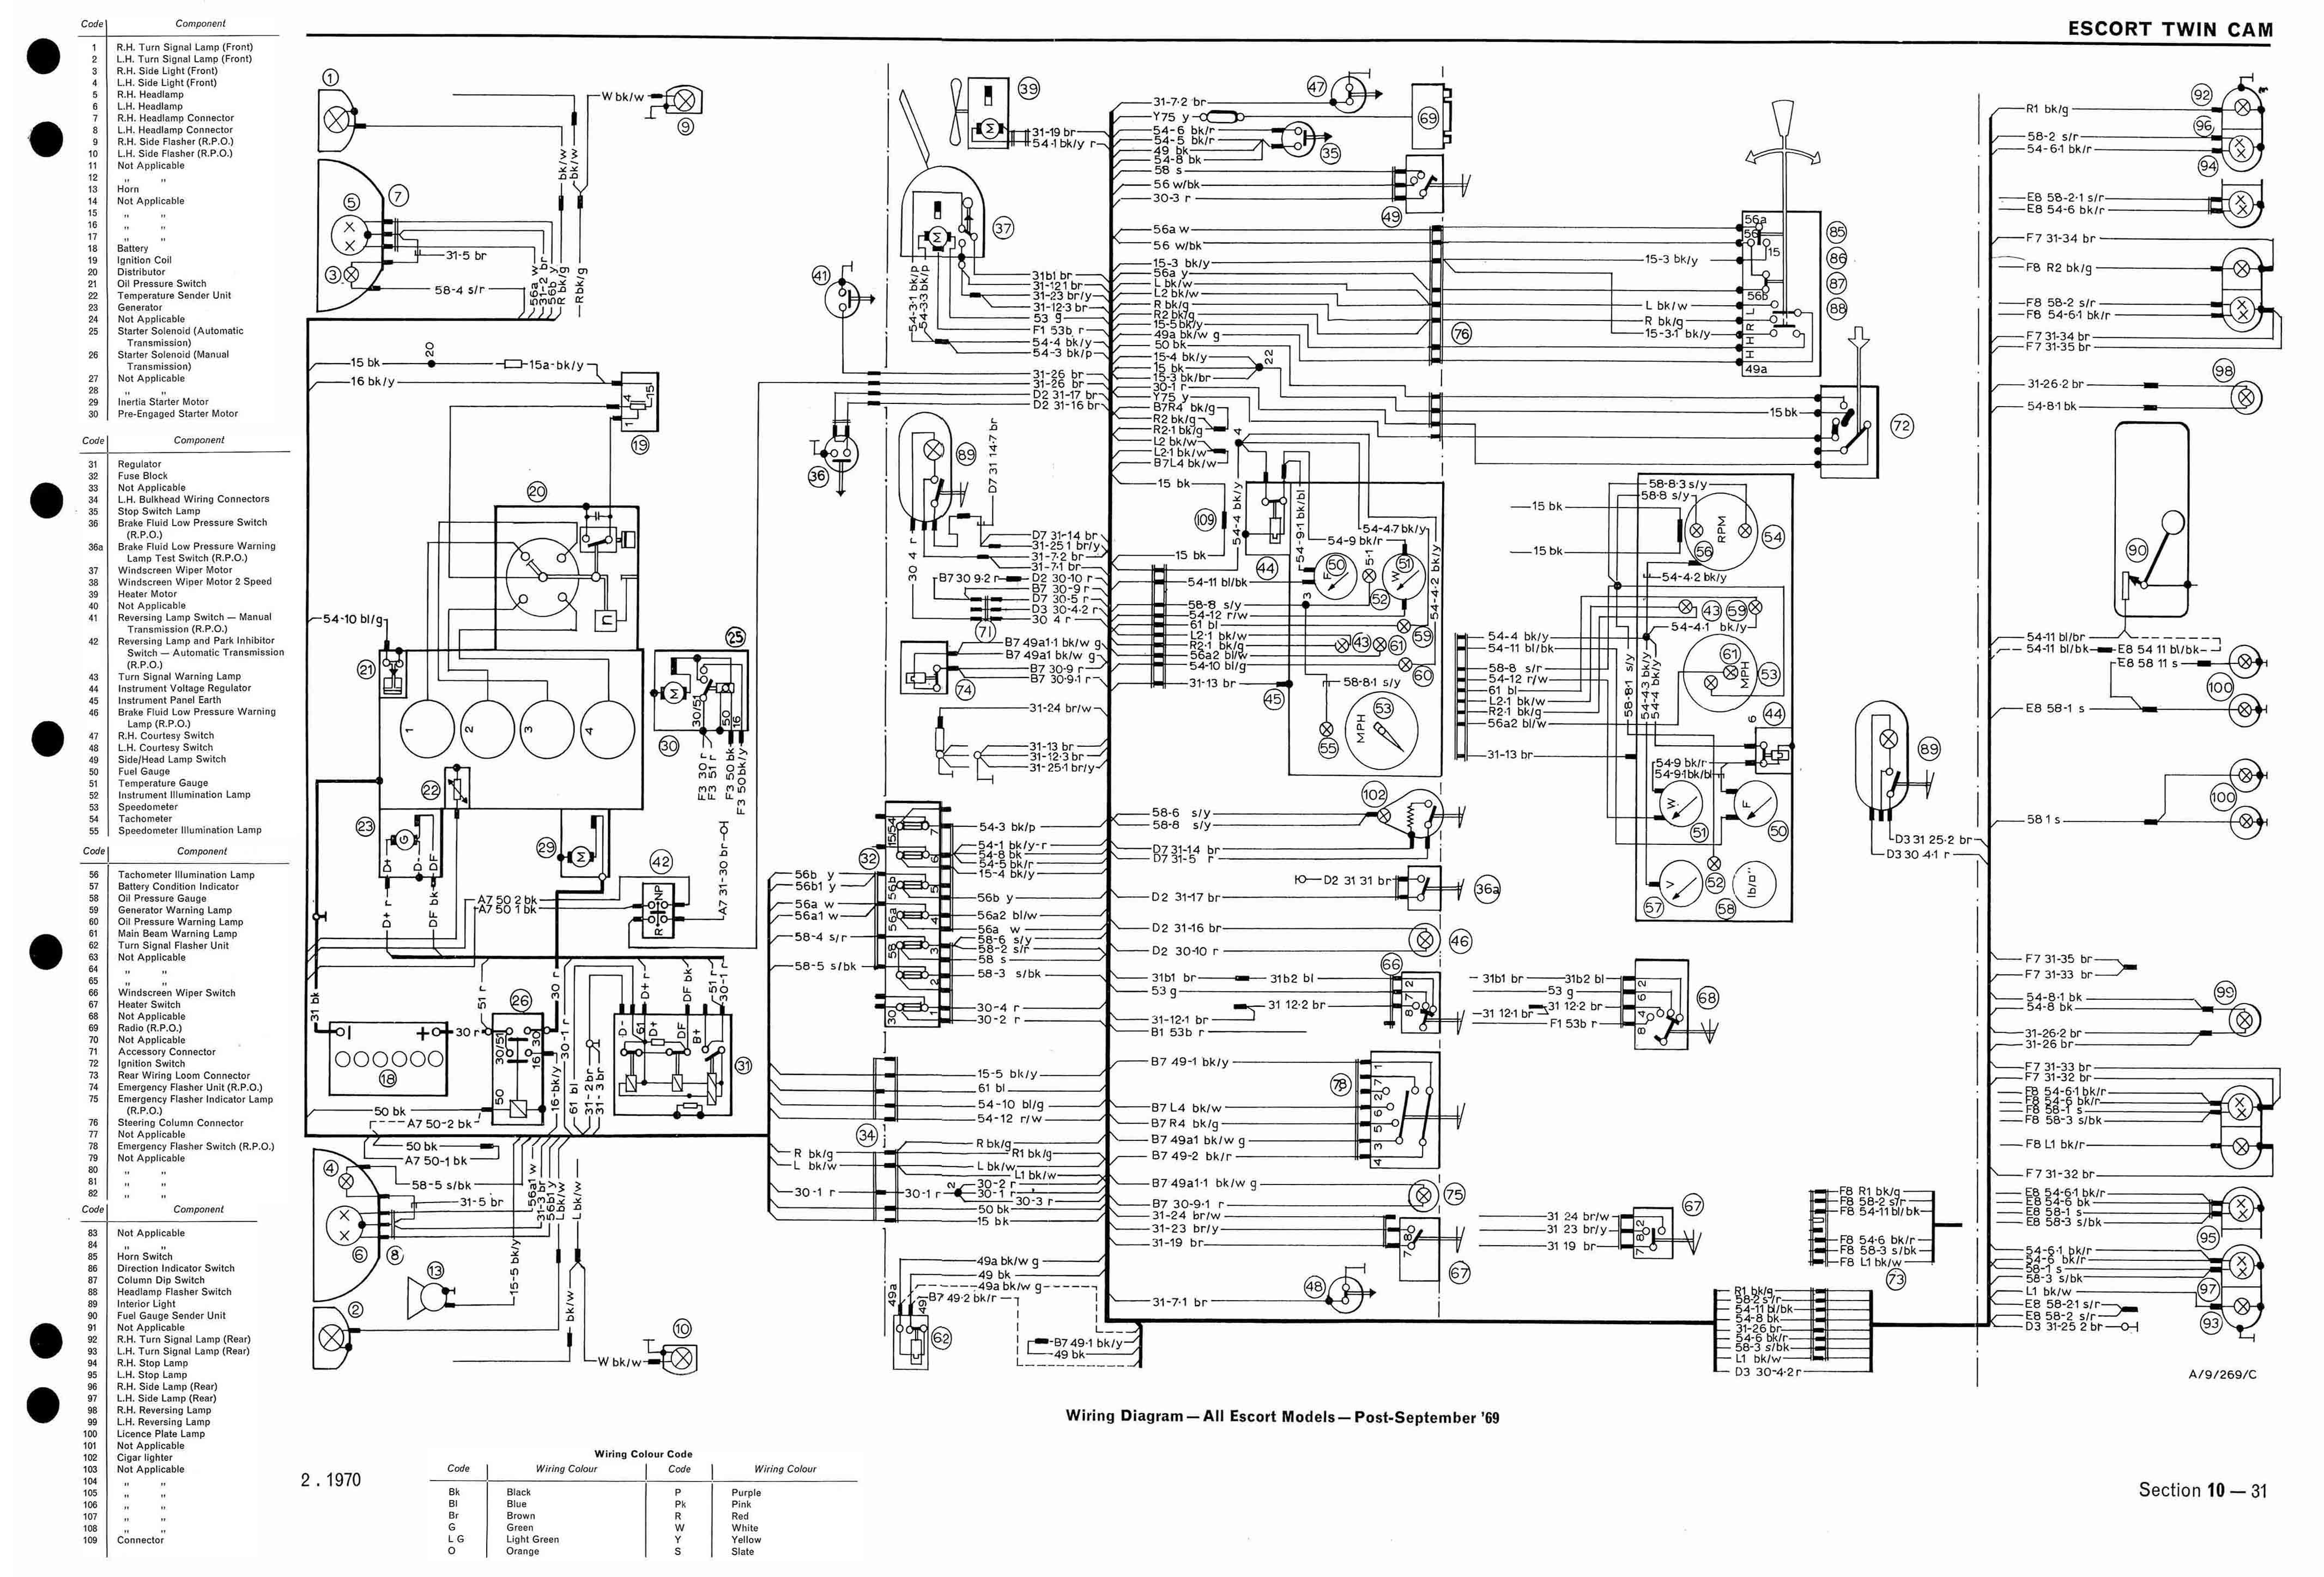 2001 ford Escort Engine Diagram Awesome 1997 ford Escort Wiring Diagram S Everything You Need Of 2001 ford Escort Engine Diagram